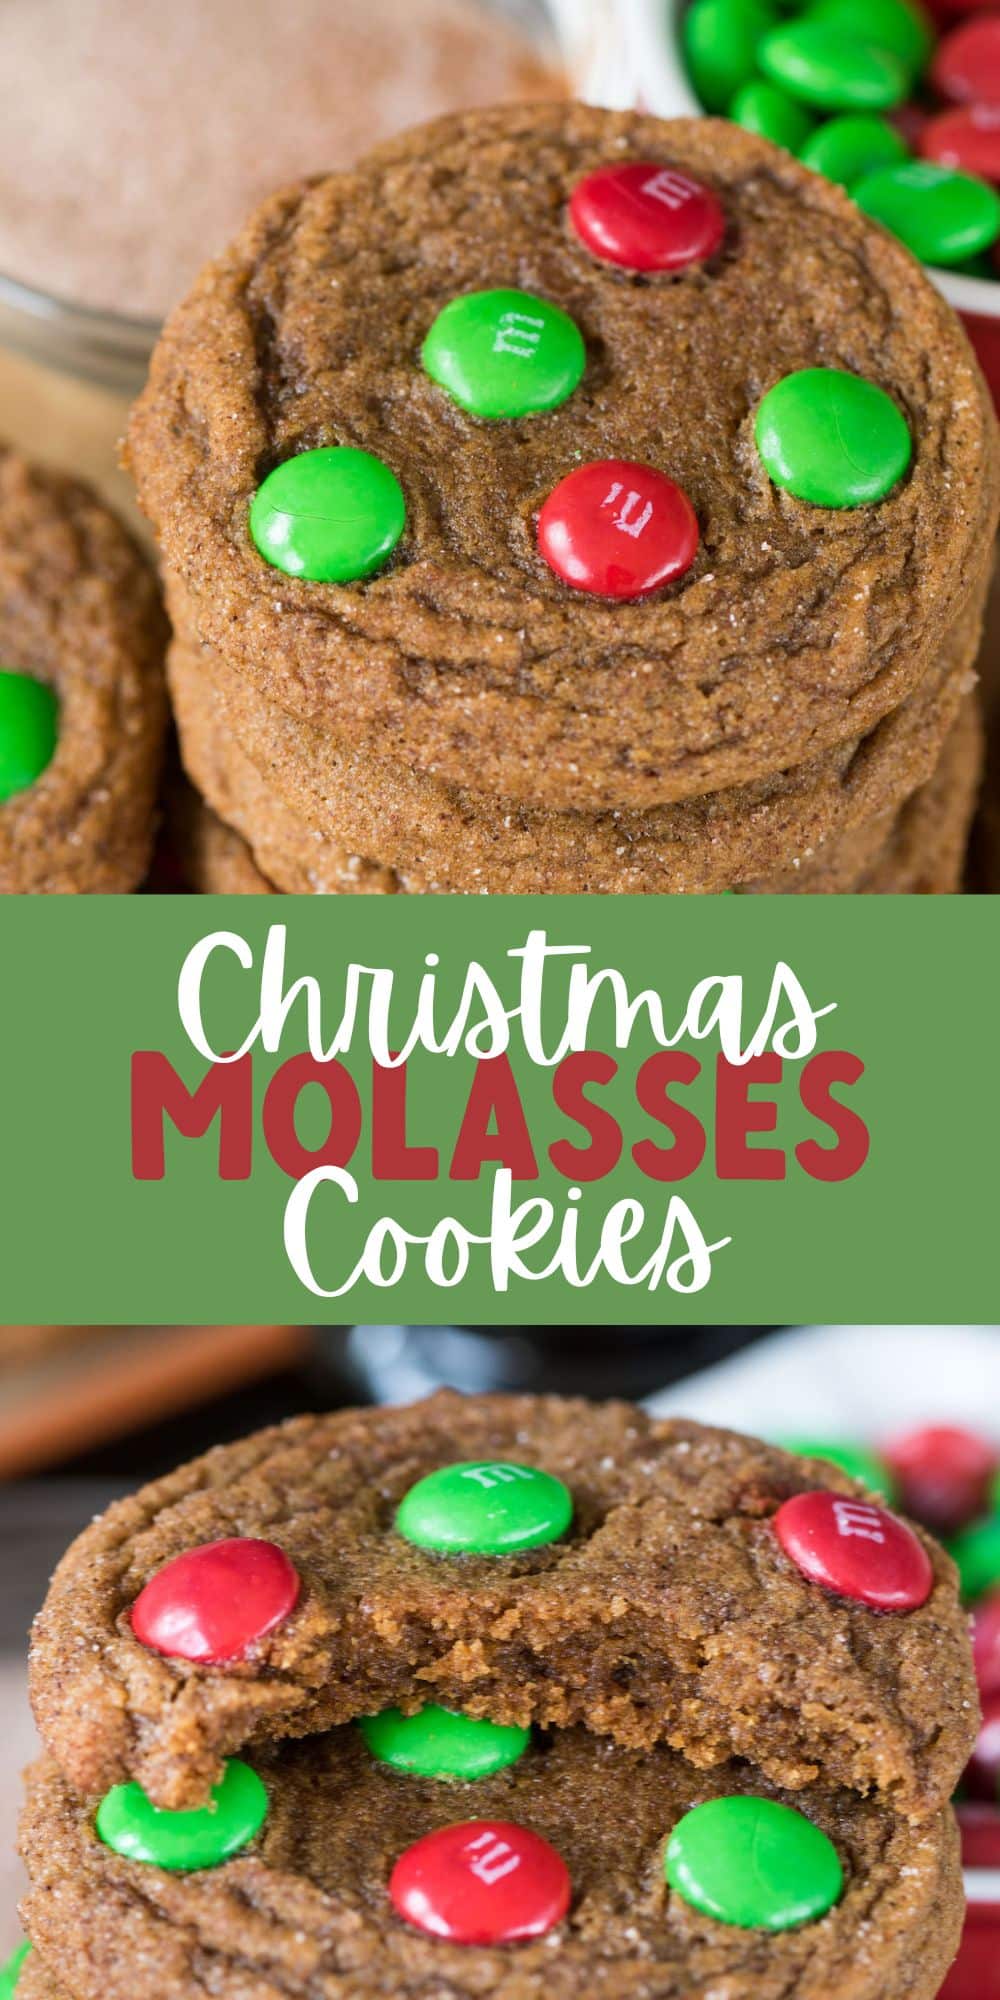 two photos of molasses cookies with green and red m&ms baked in and words in the middle